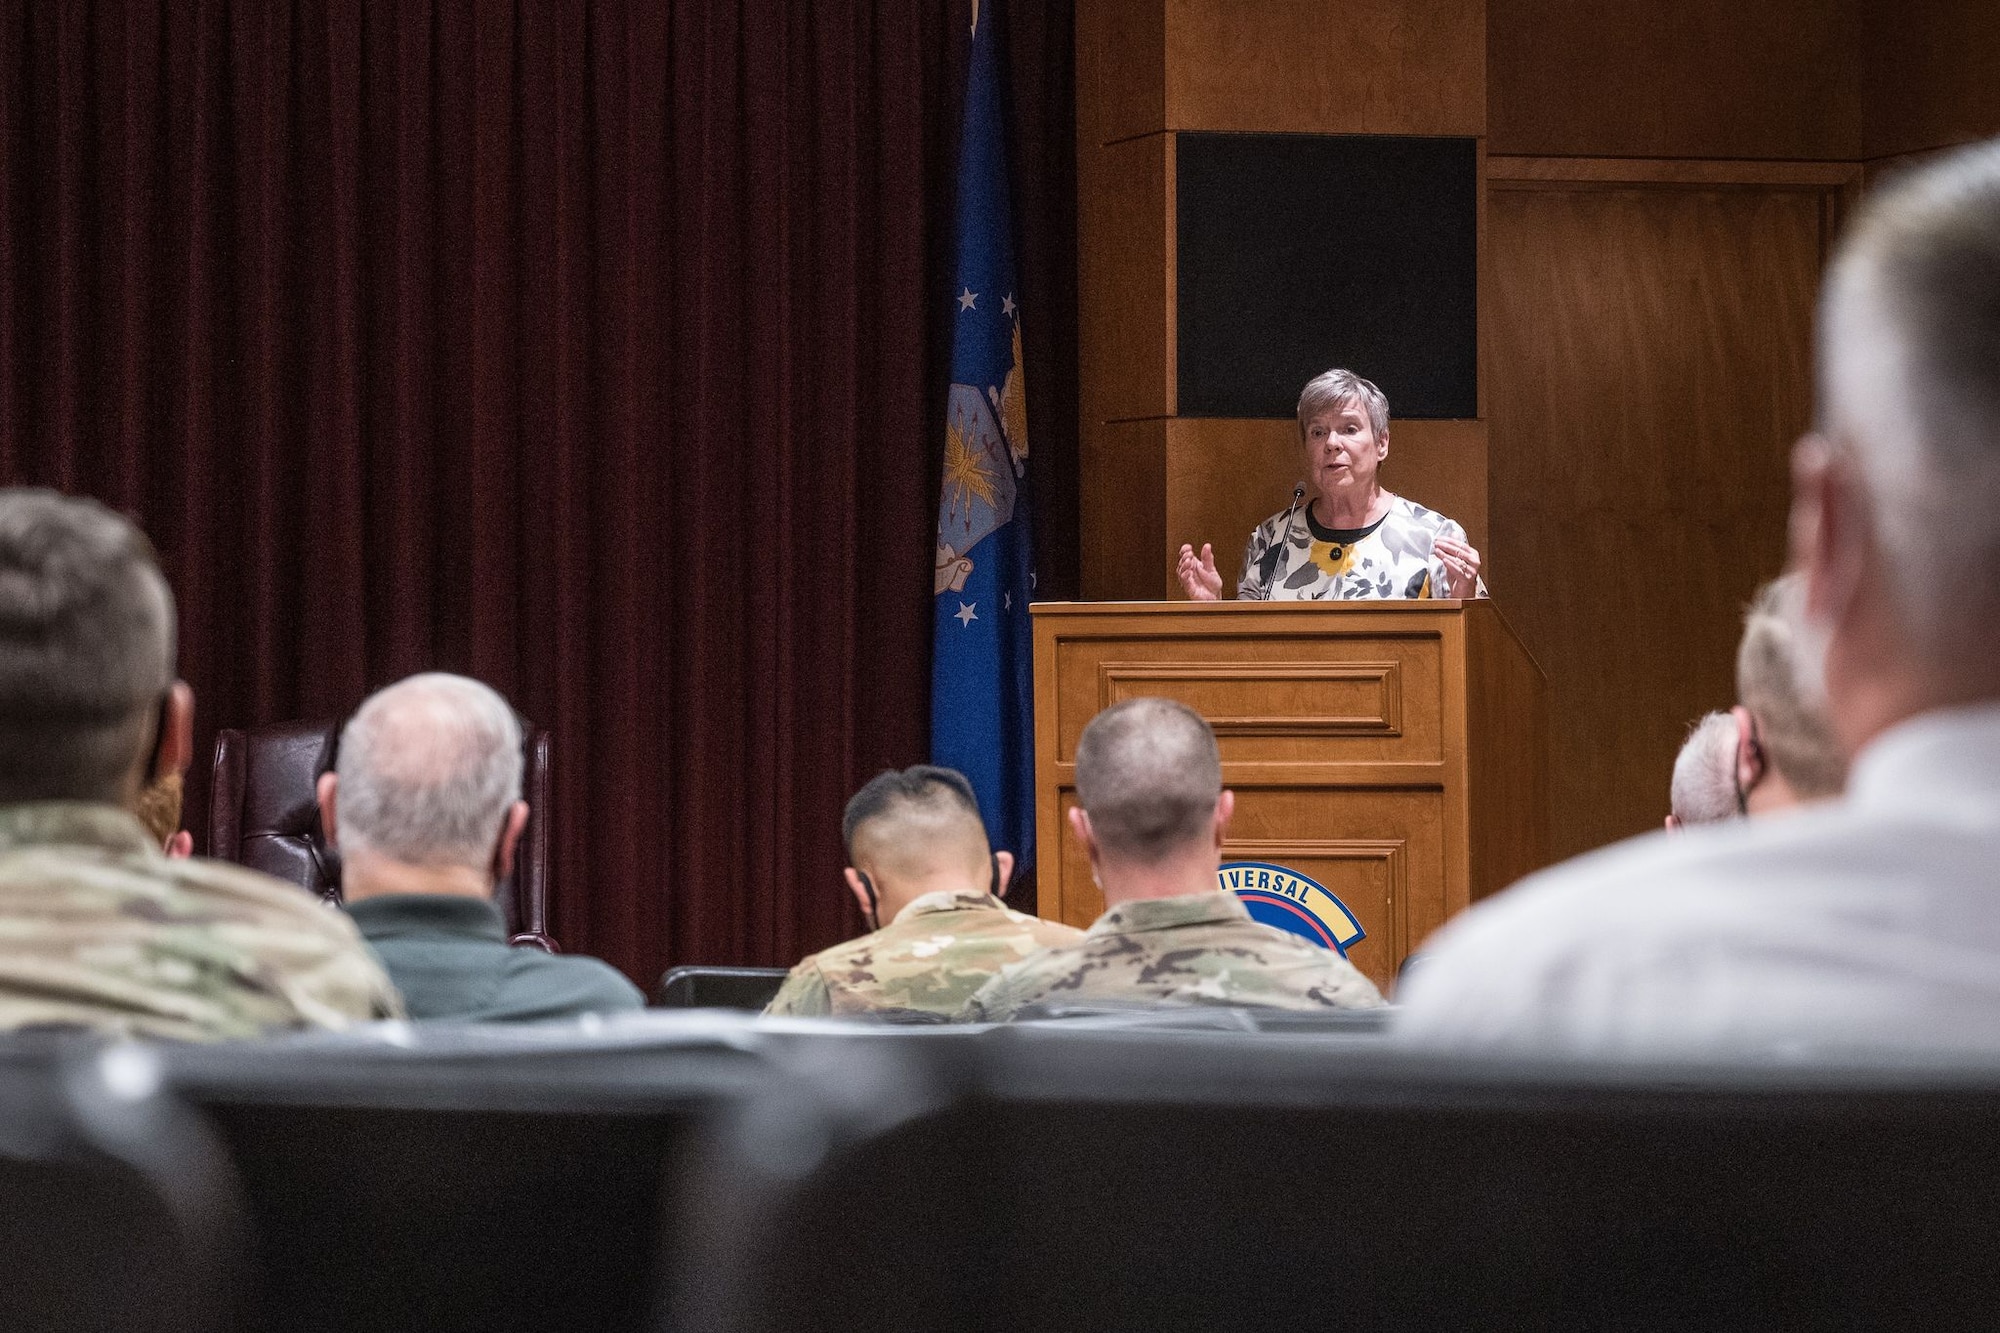 A woman stands at a podium in front of a crowd of uniformed service members in a conference room